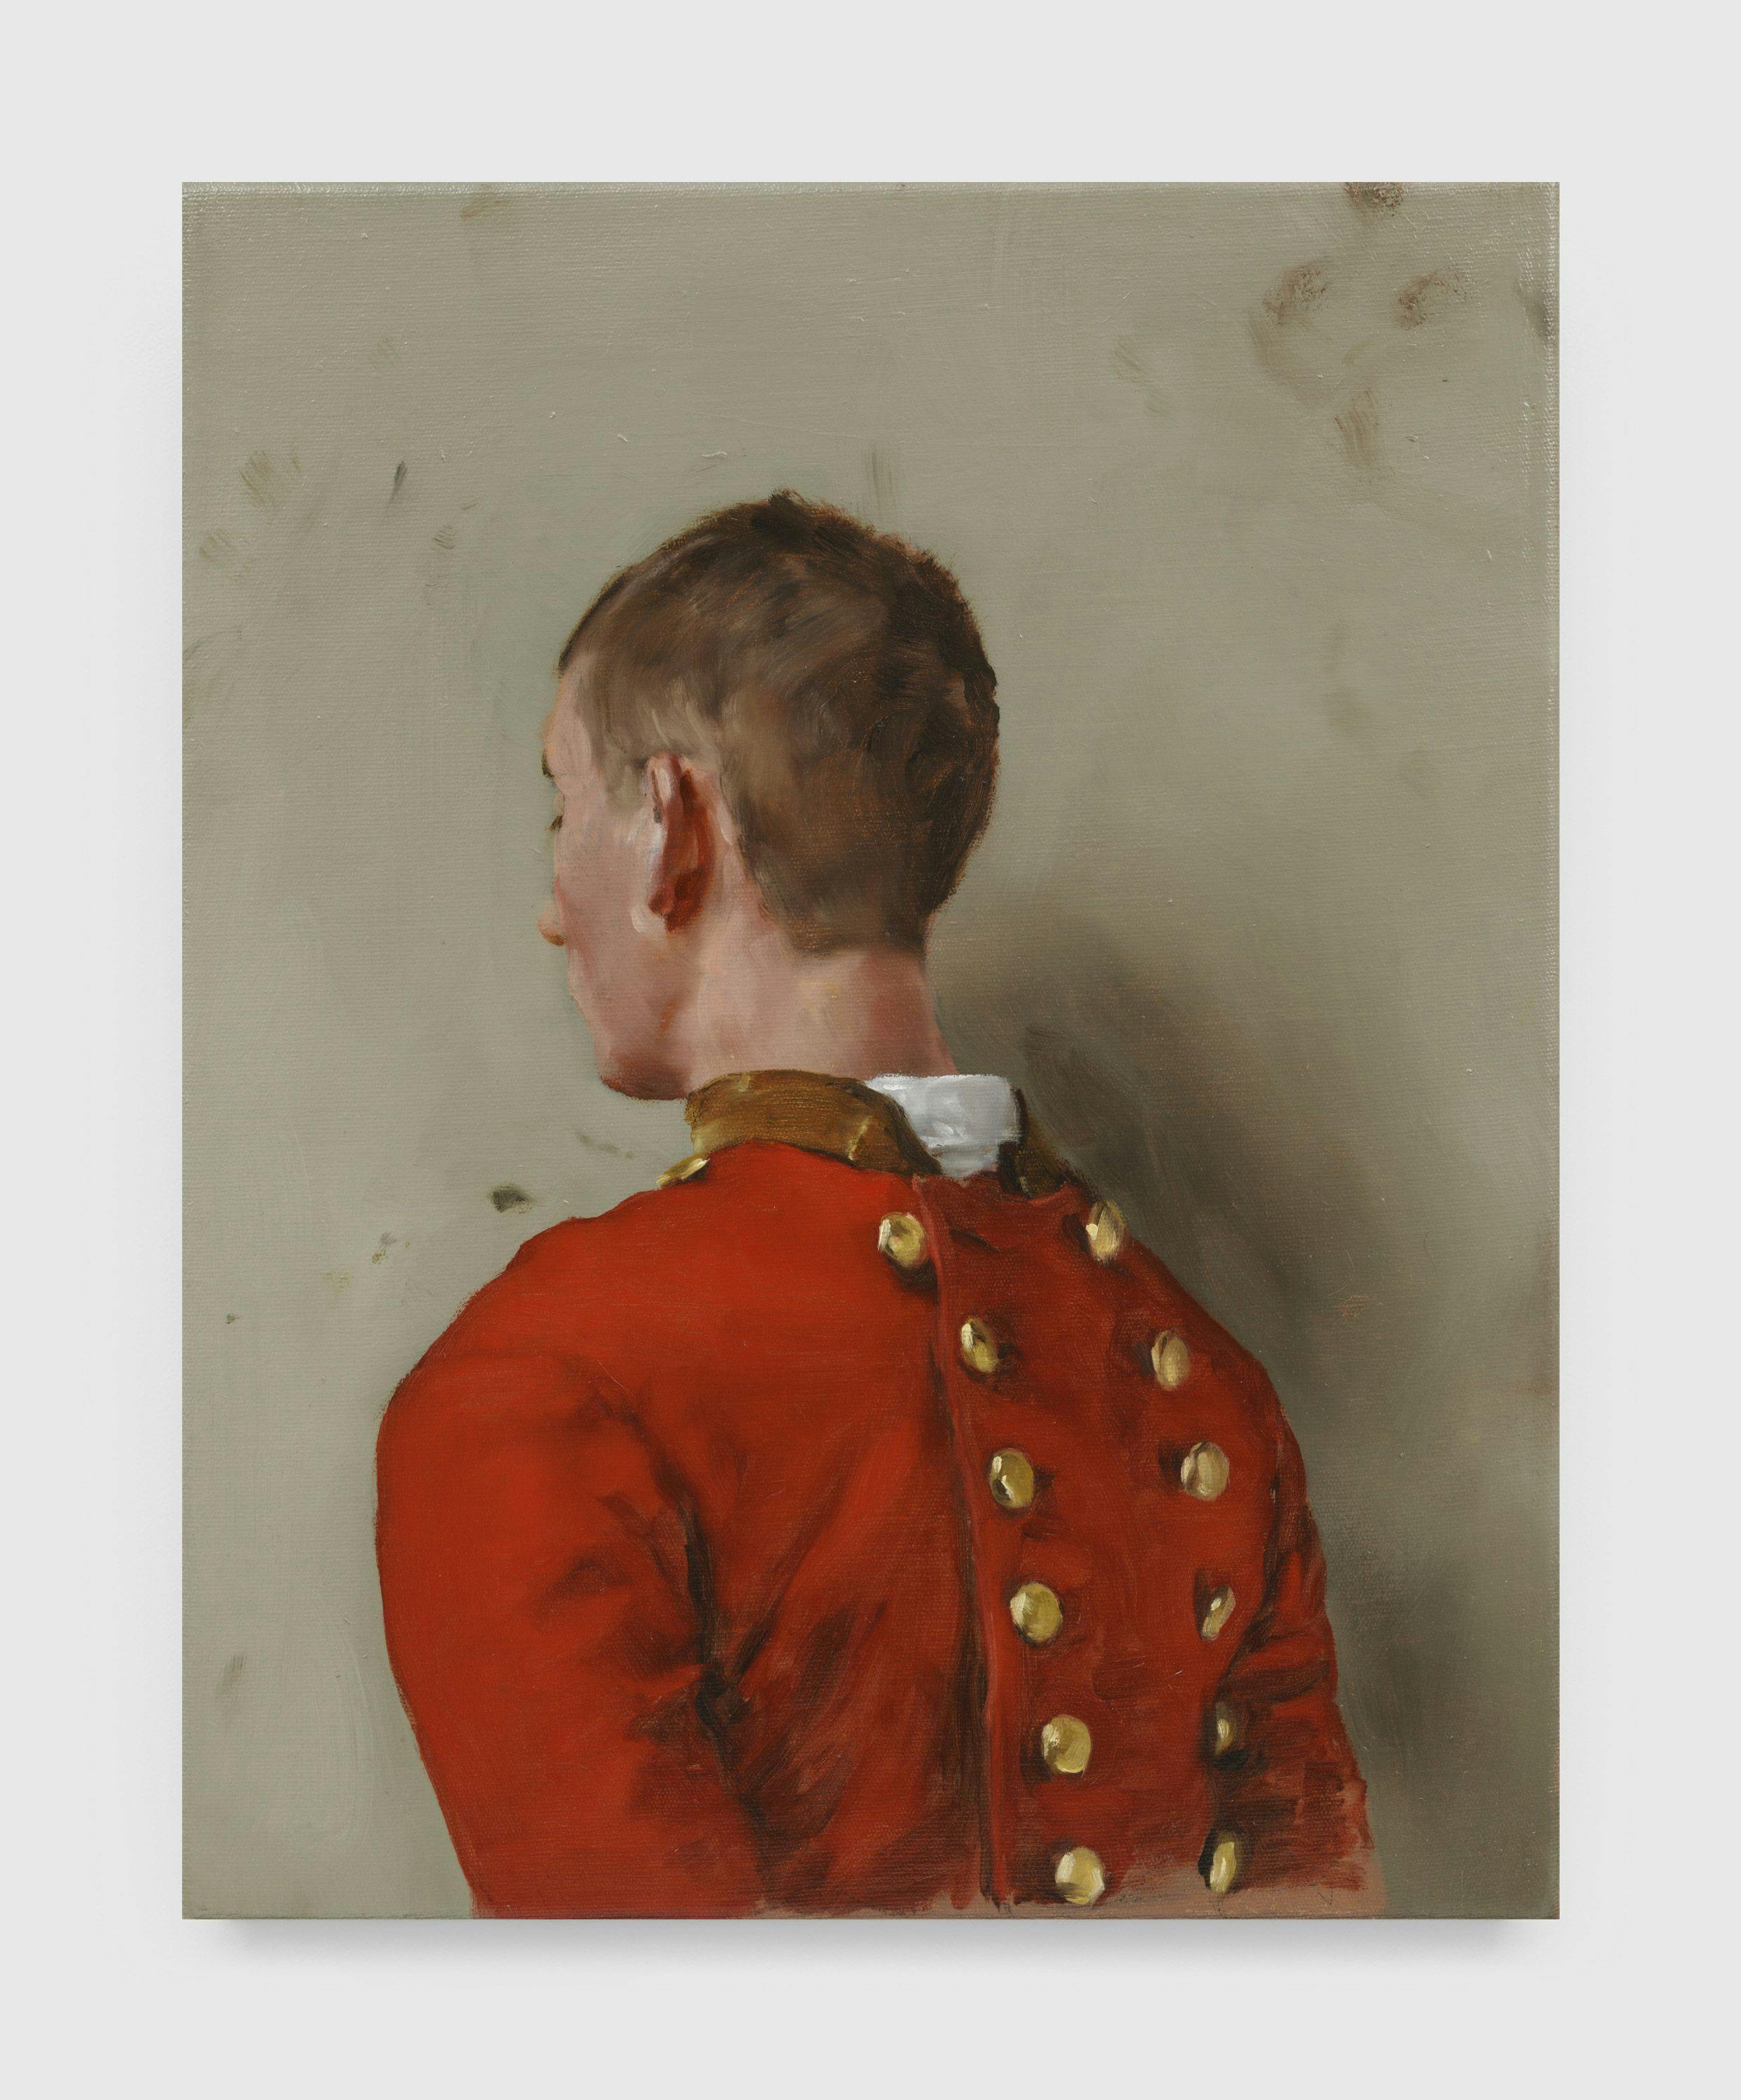 A painting by Michaël Borremans, titled Lakei, dated 2010.